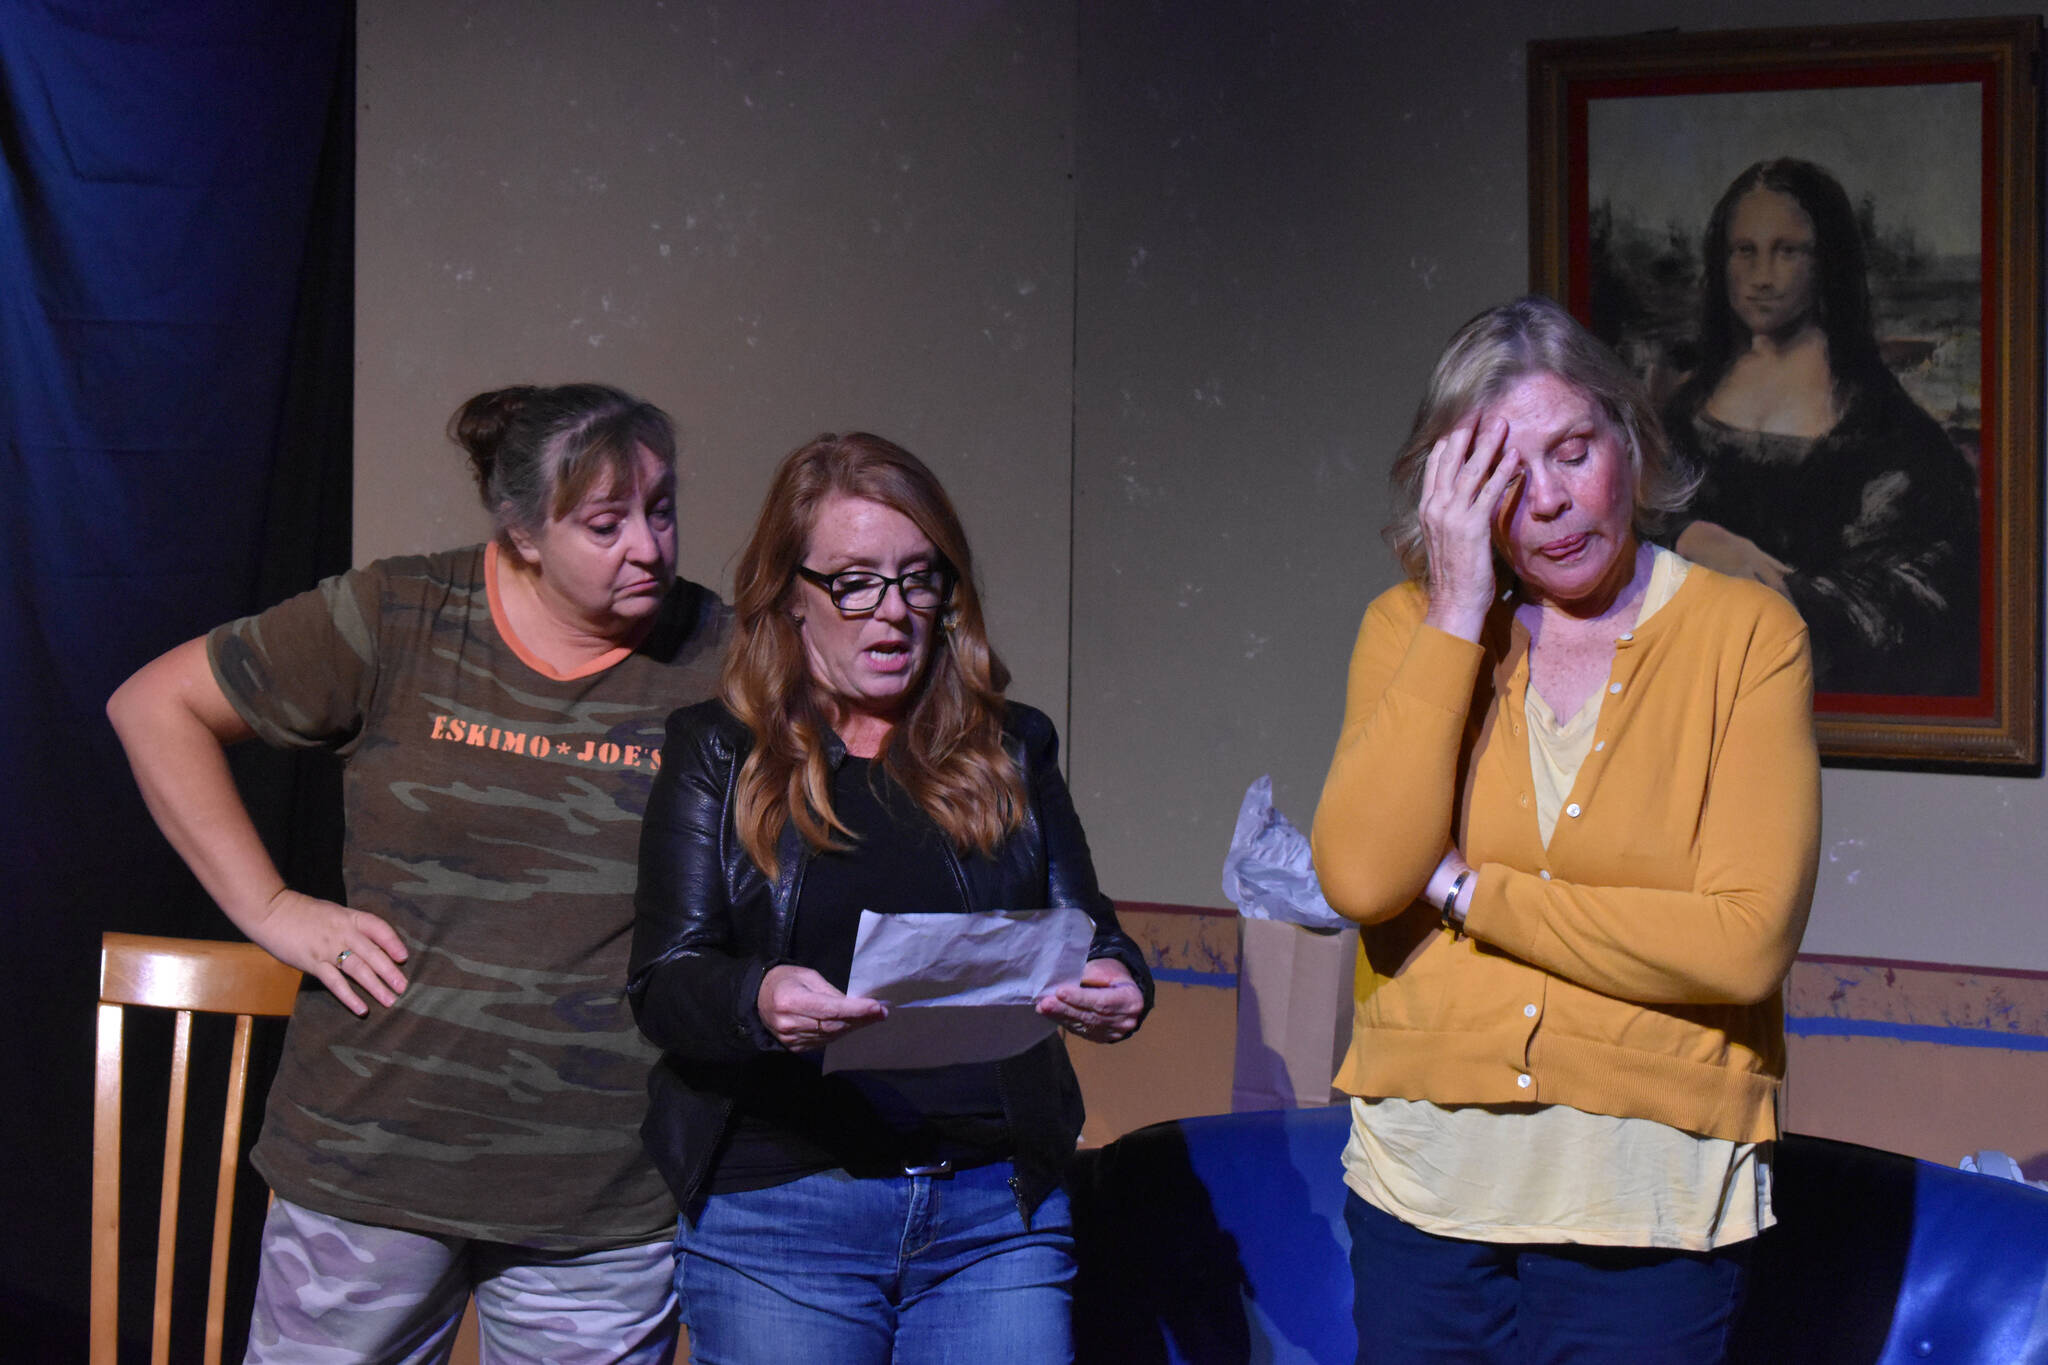 Donna Shirnberg, Tracie Sanborn and Terri Zopf-Schoessler act during a rehersal of “Menopause Made Me Do It” on Tuesday, Sept. 13, 2022 in Soldotna, Alaska. Shirnberg will be producing “Disaster the Musical” for Kenai Performers. (Jake Dye/Peninsula Clarion)